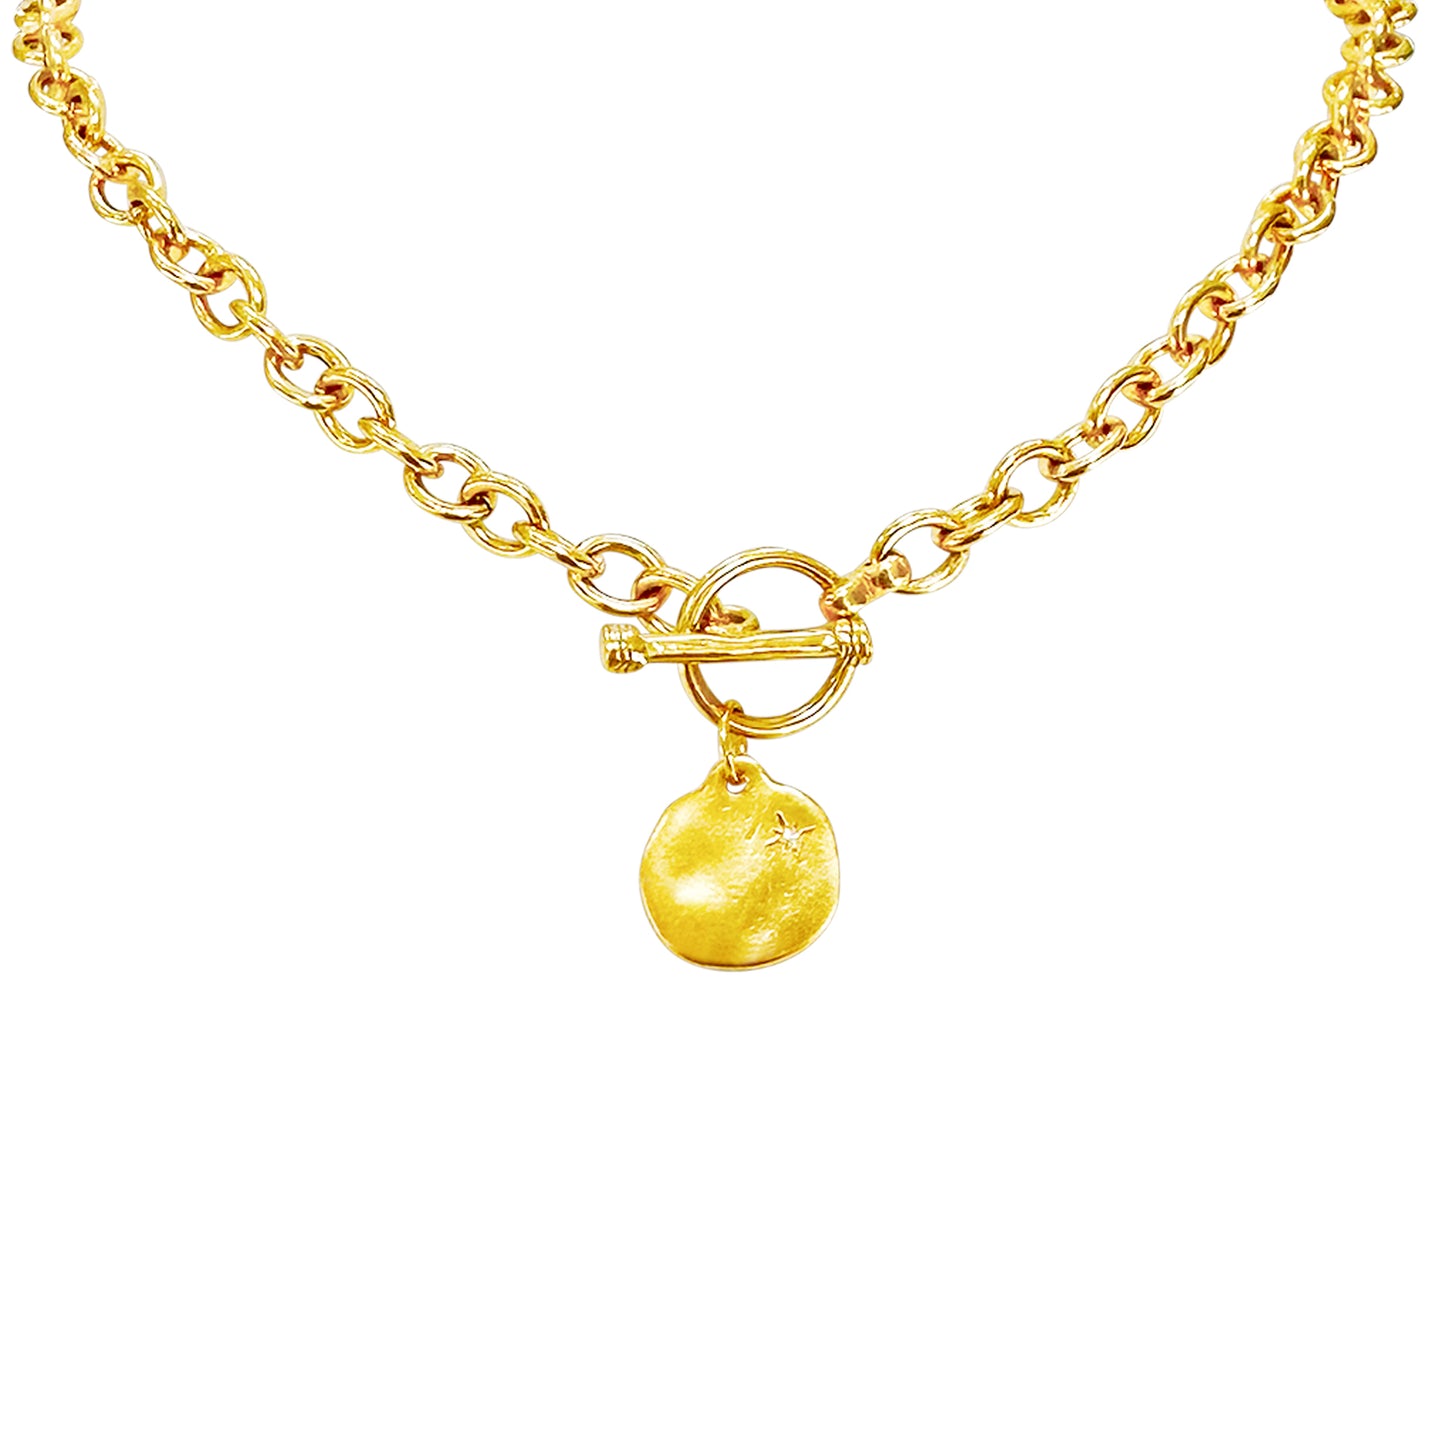 Toggle Me Up Gold Toggle Necklace Chain